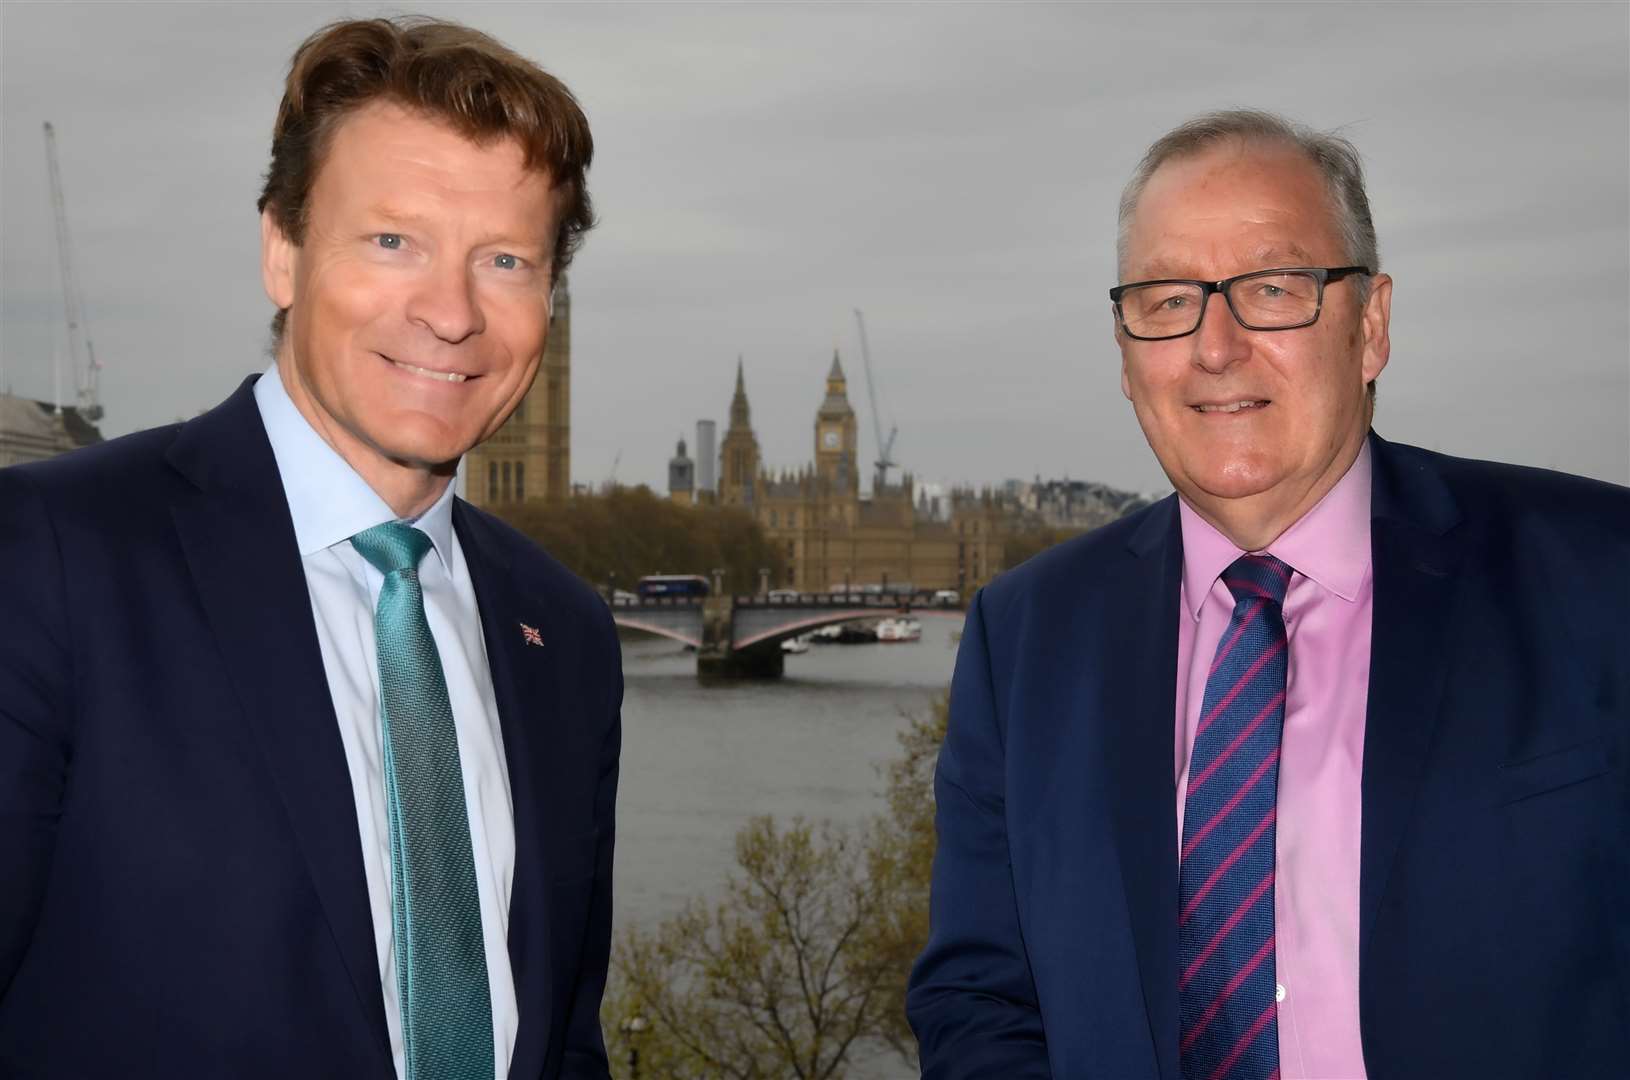 Richard Tice and Nigel Farage persuaded Howard Cox, right, to run as Reform UK candidate